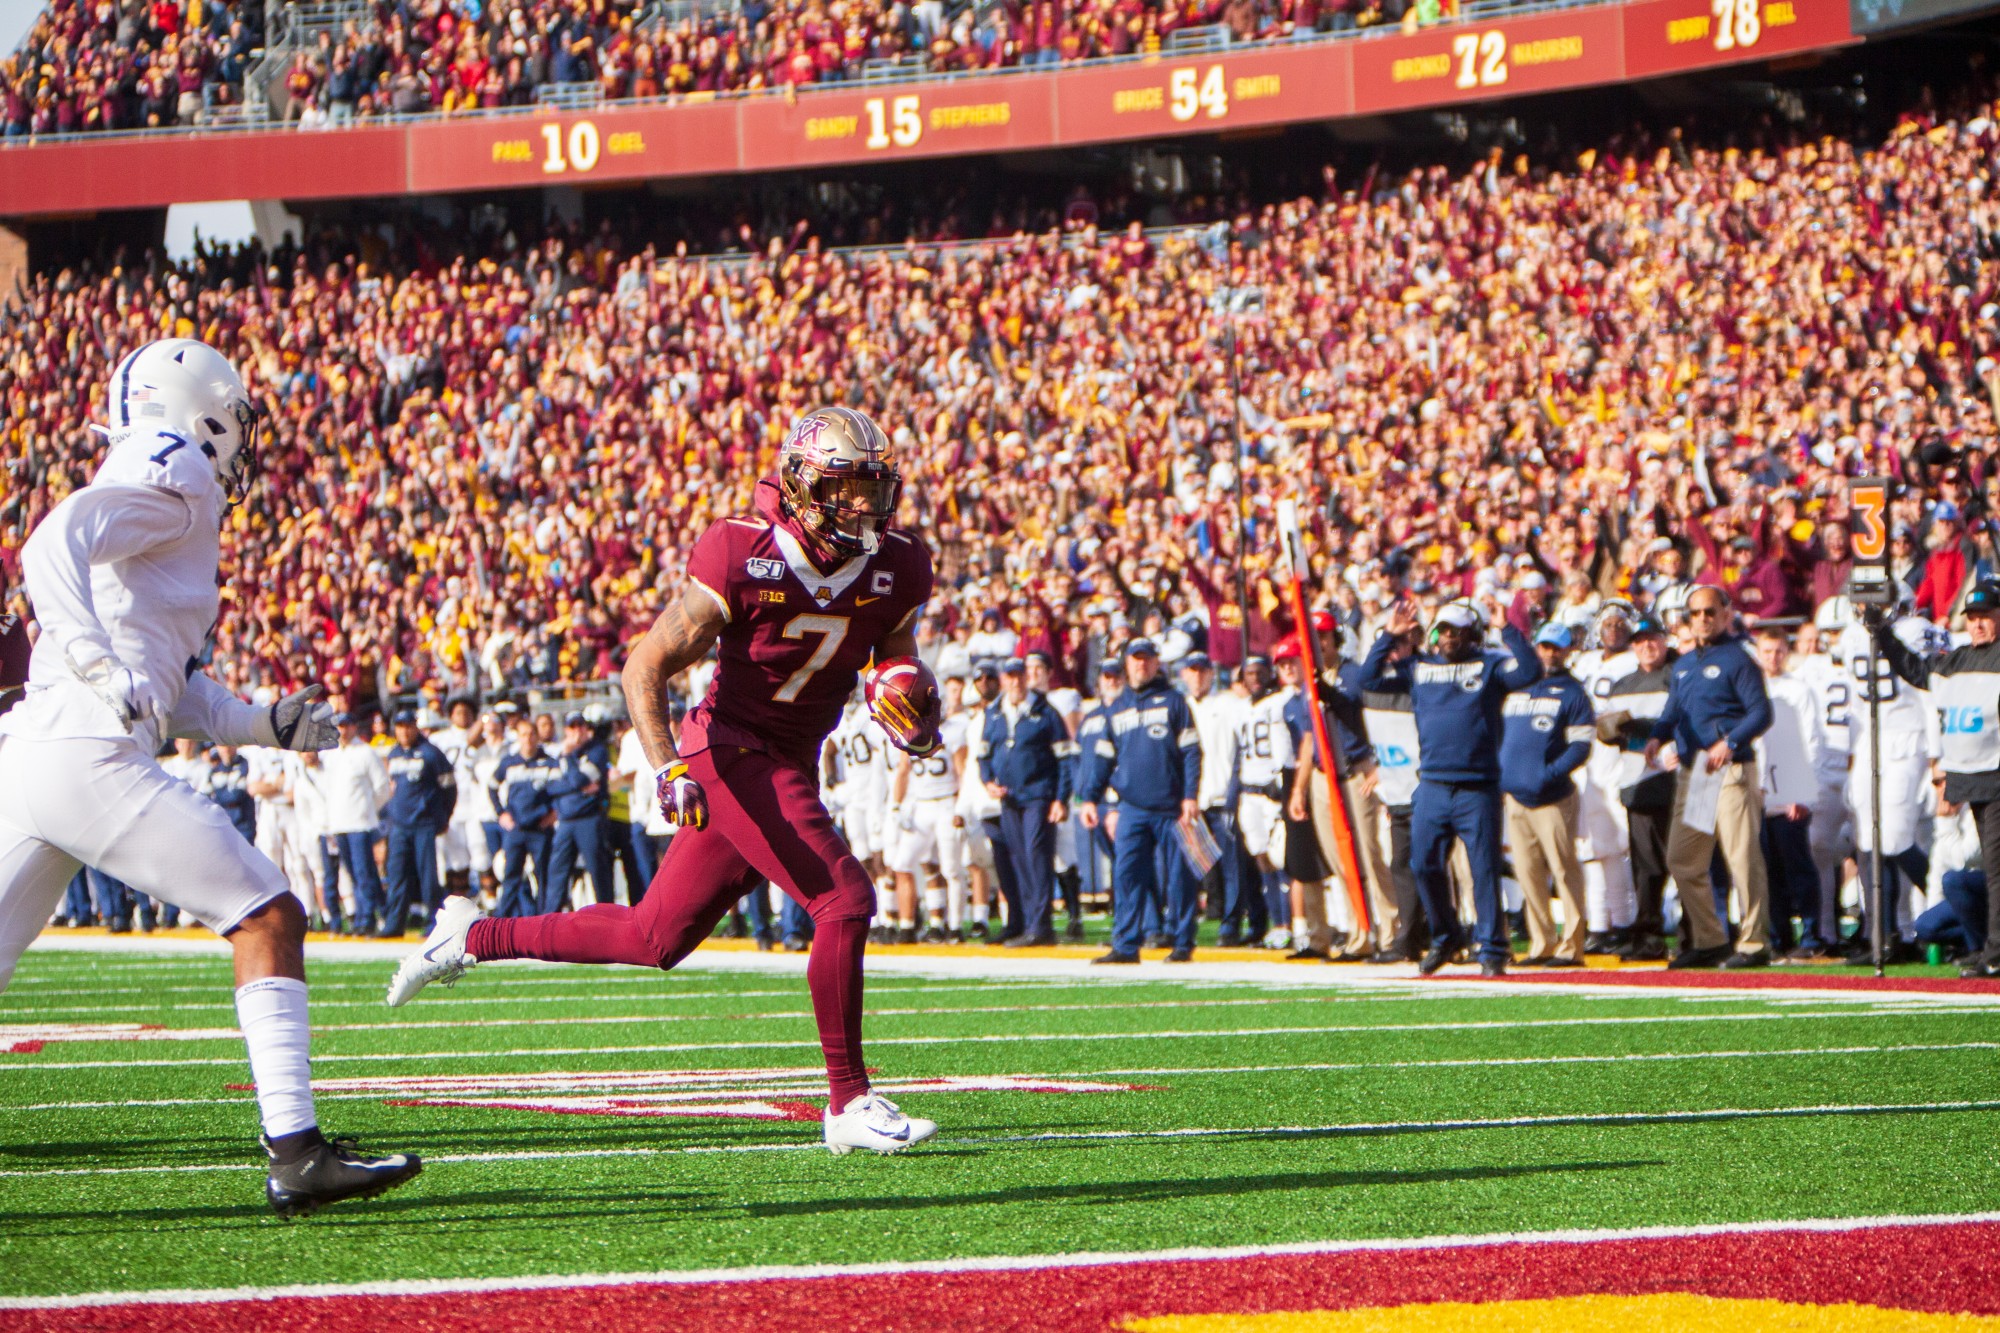 Wide Receiver Chris Autman-Bell approaches the end zone at TCF Bank Stadium on Saturday, Nov. 9. The Gophers defeated Penn State 31-26 to bring their record to 9-0. A first since 1904.